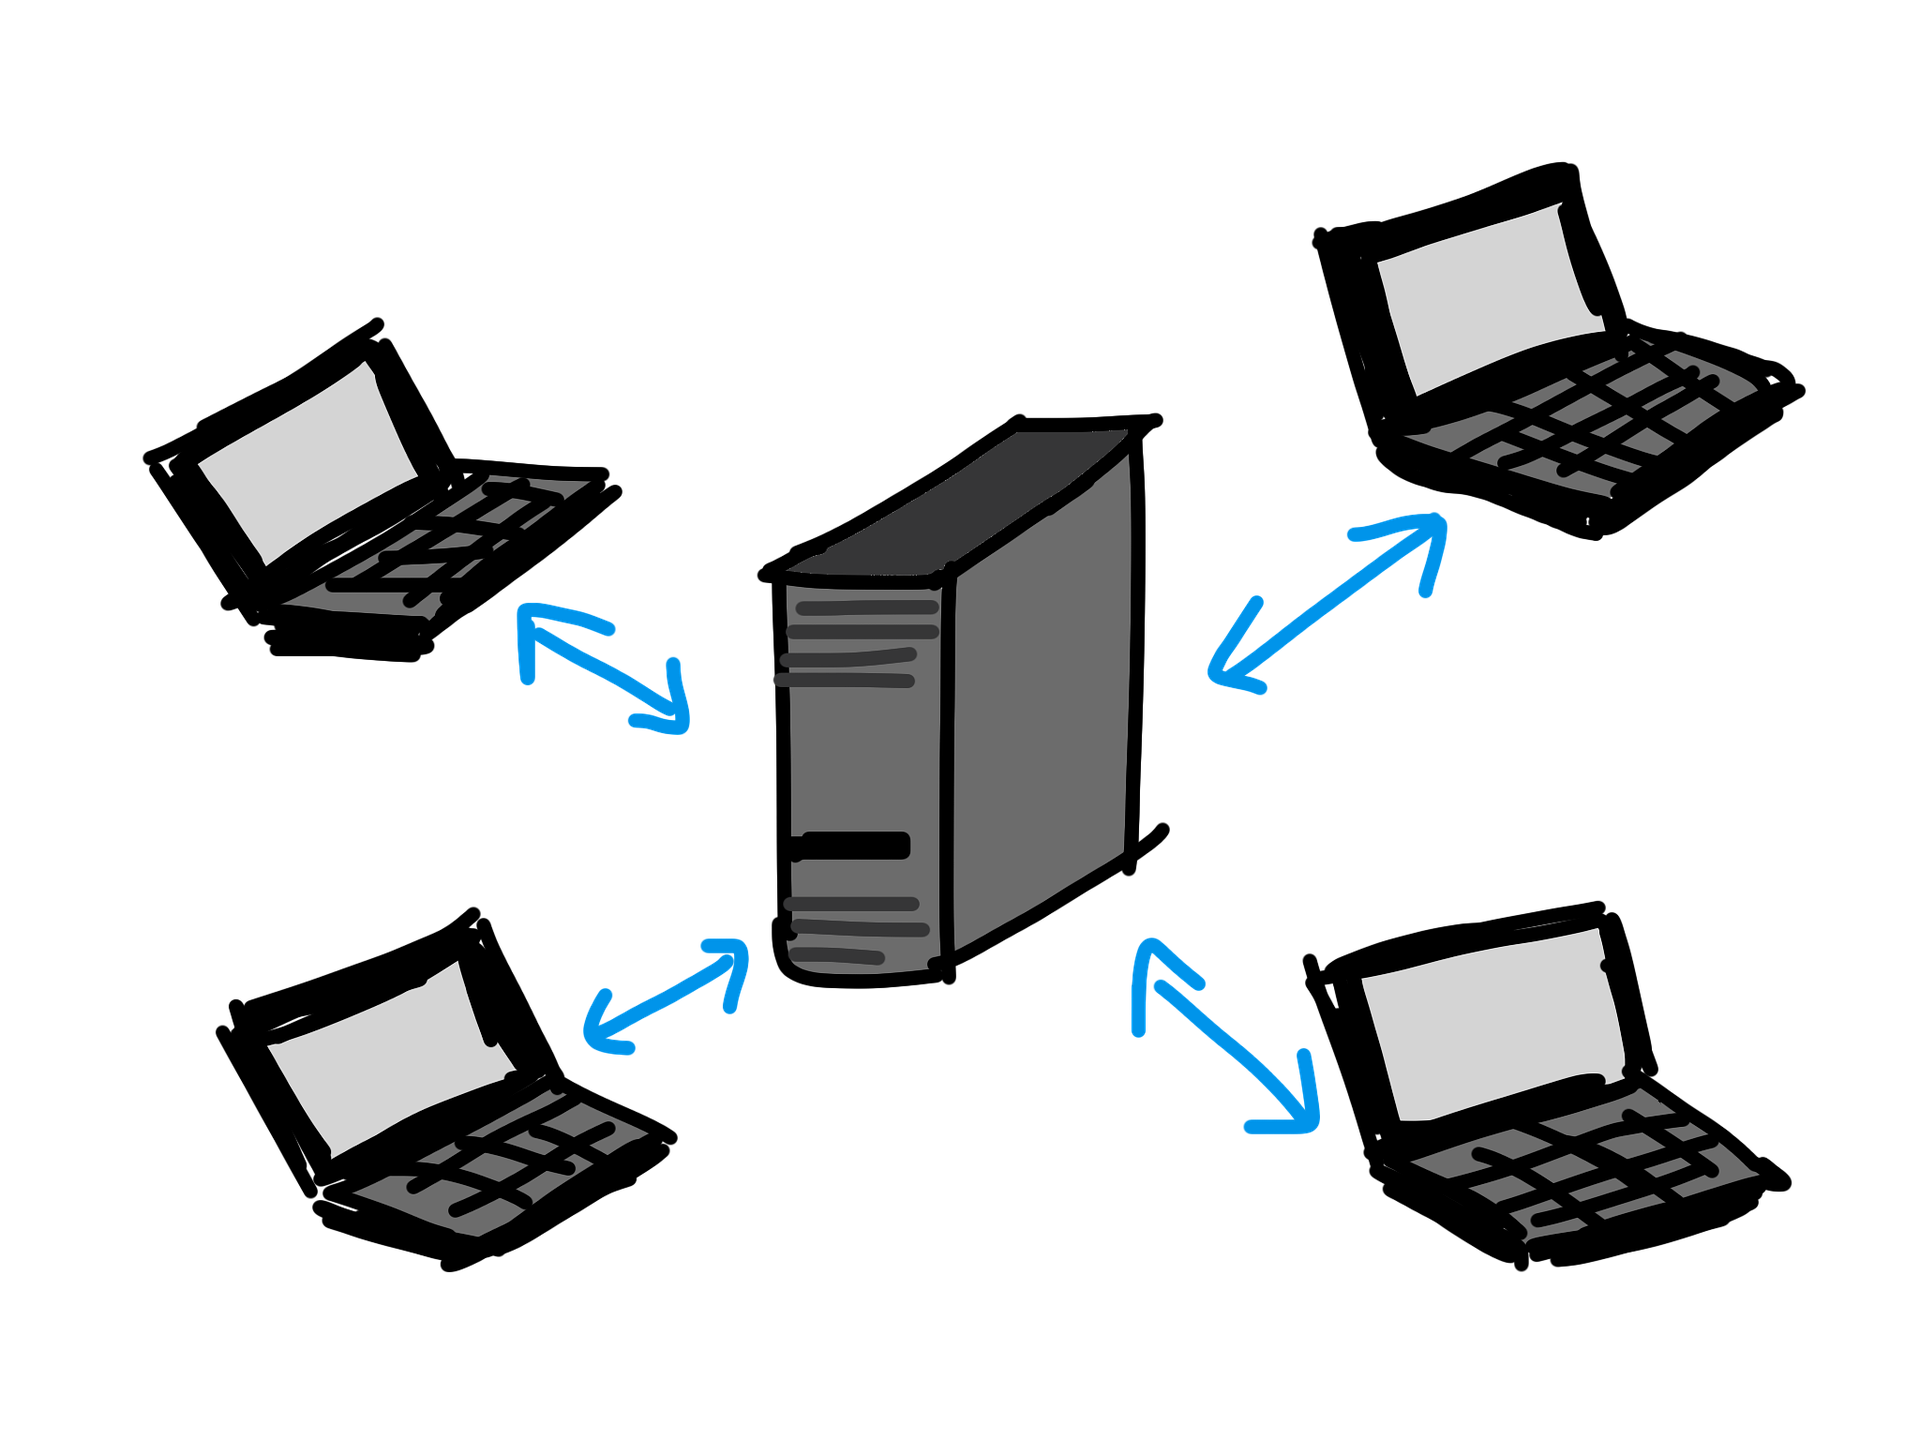 Computers overwhelmingly communicate with one another via central servers. 